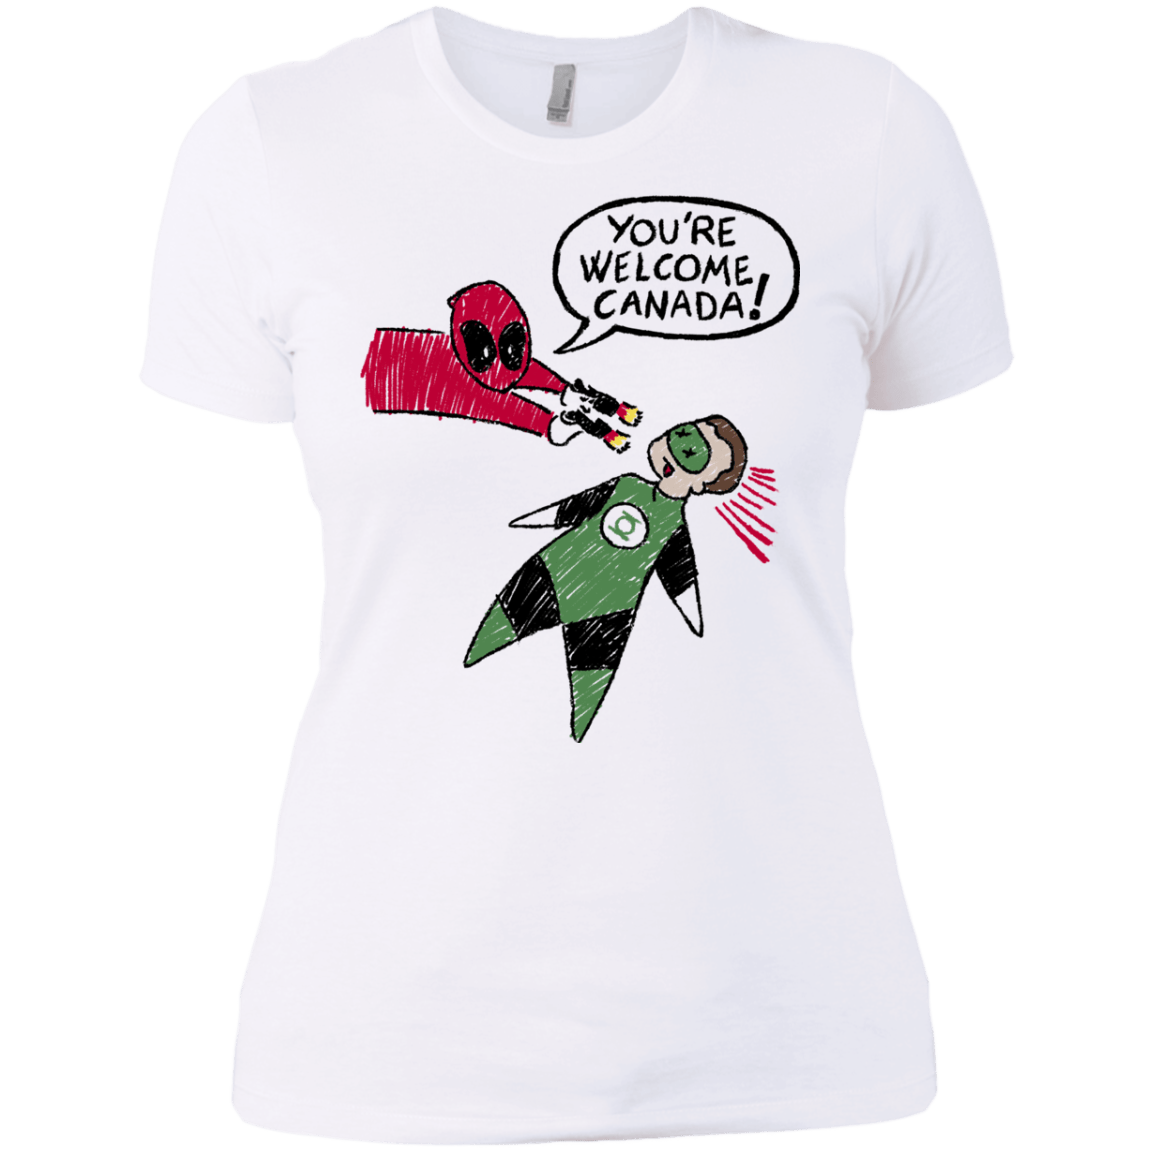 T-Shirts White / X-Small Youre Welcome Canada Women's Premium T-Shirt